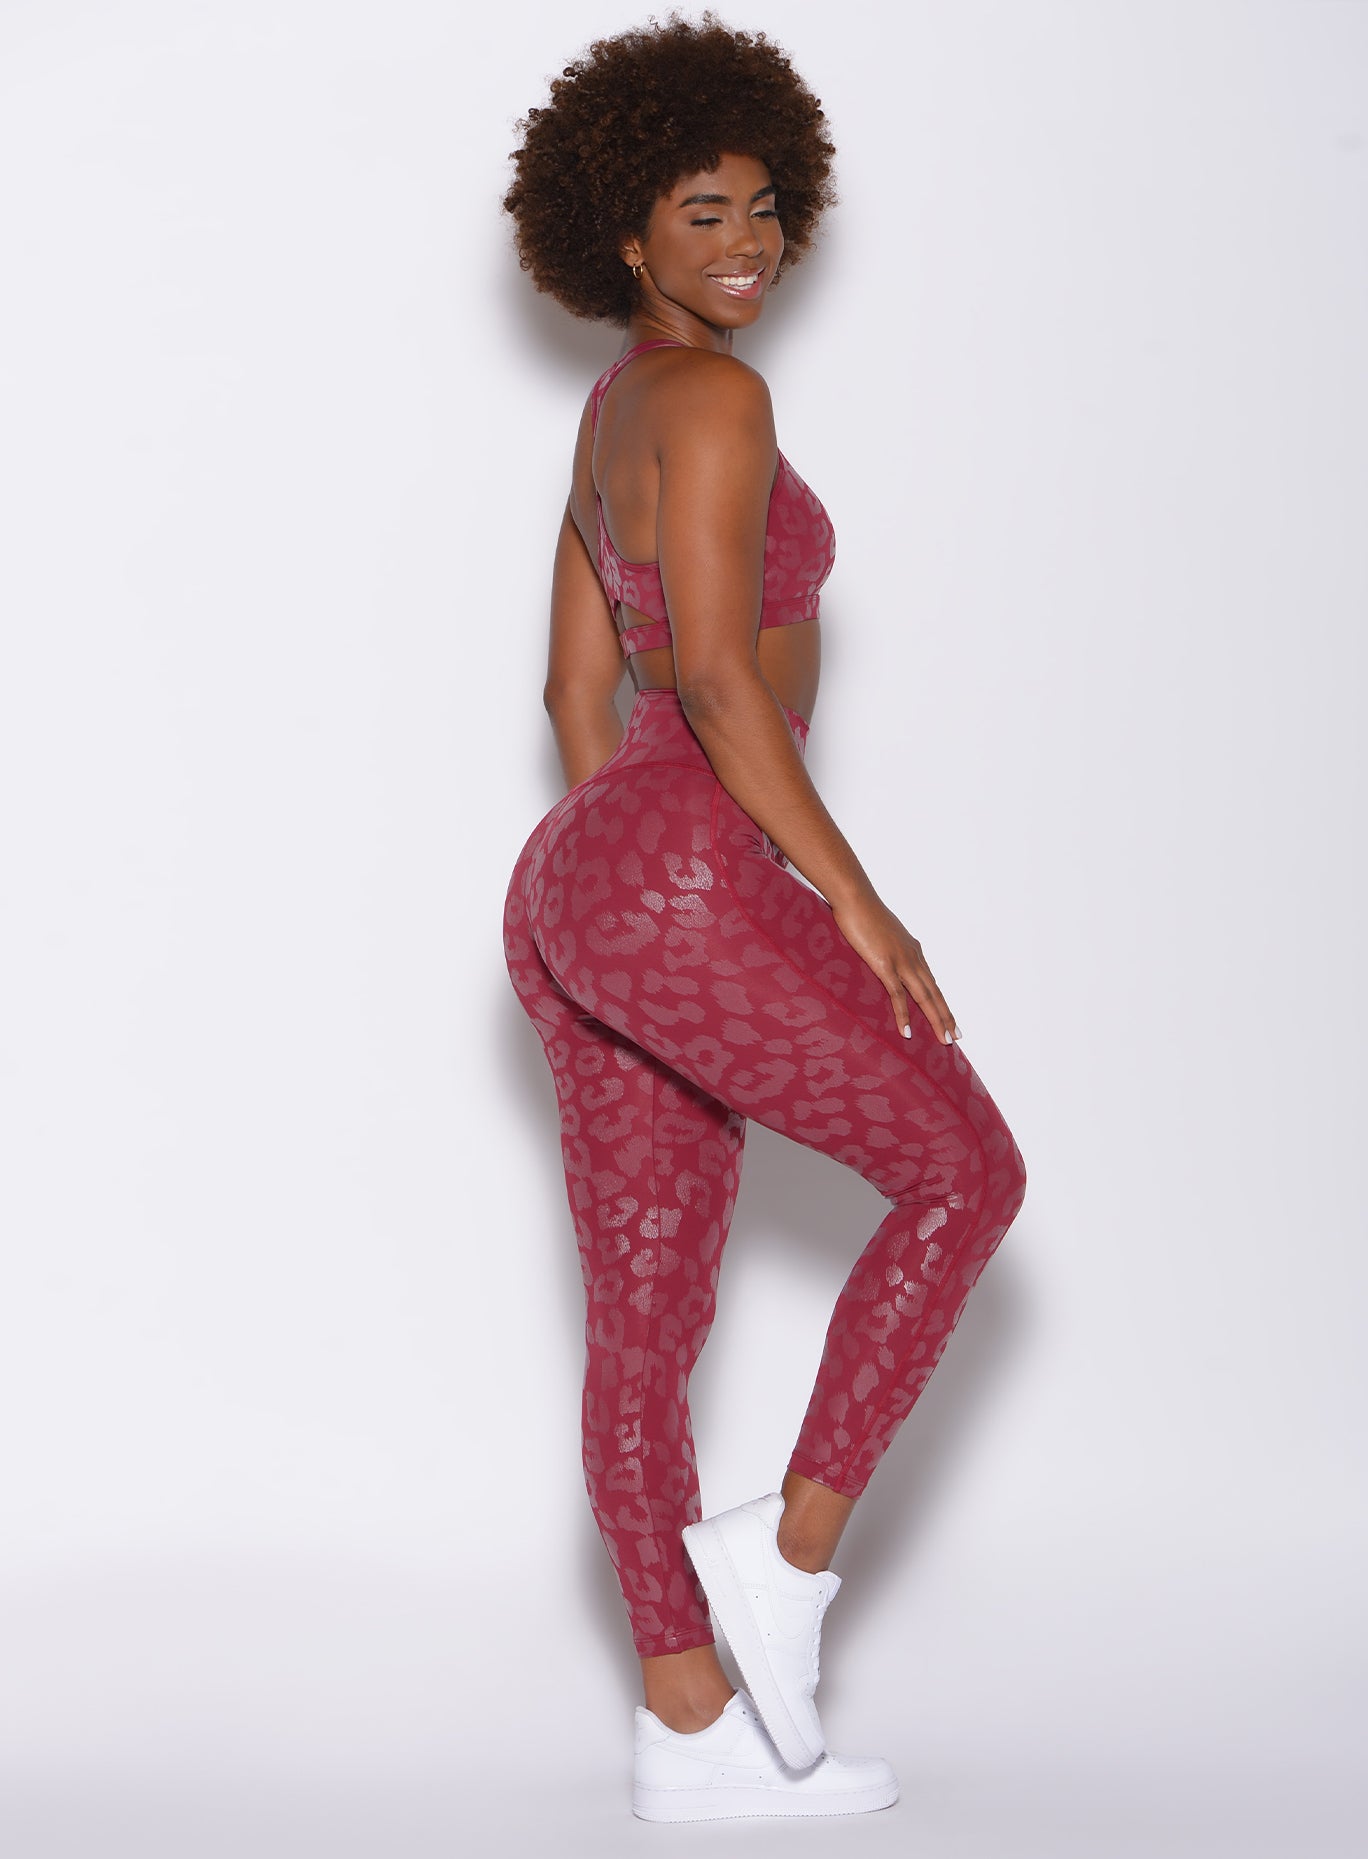 right side profile view of a model facing to her right wearing our shine leopard leggings in Raspberry Leopard color along with a matching sports bra